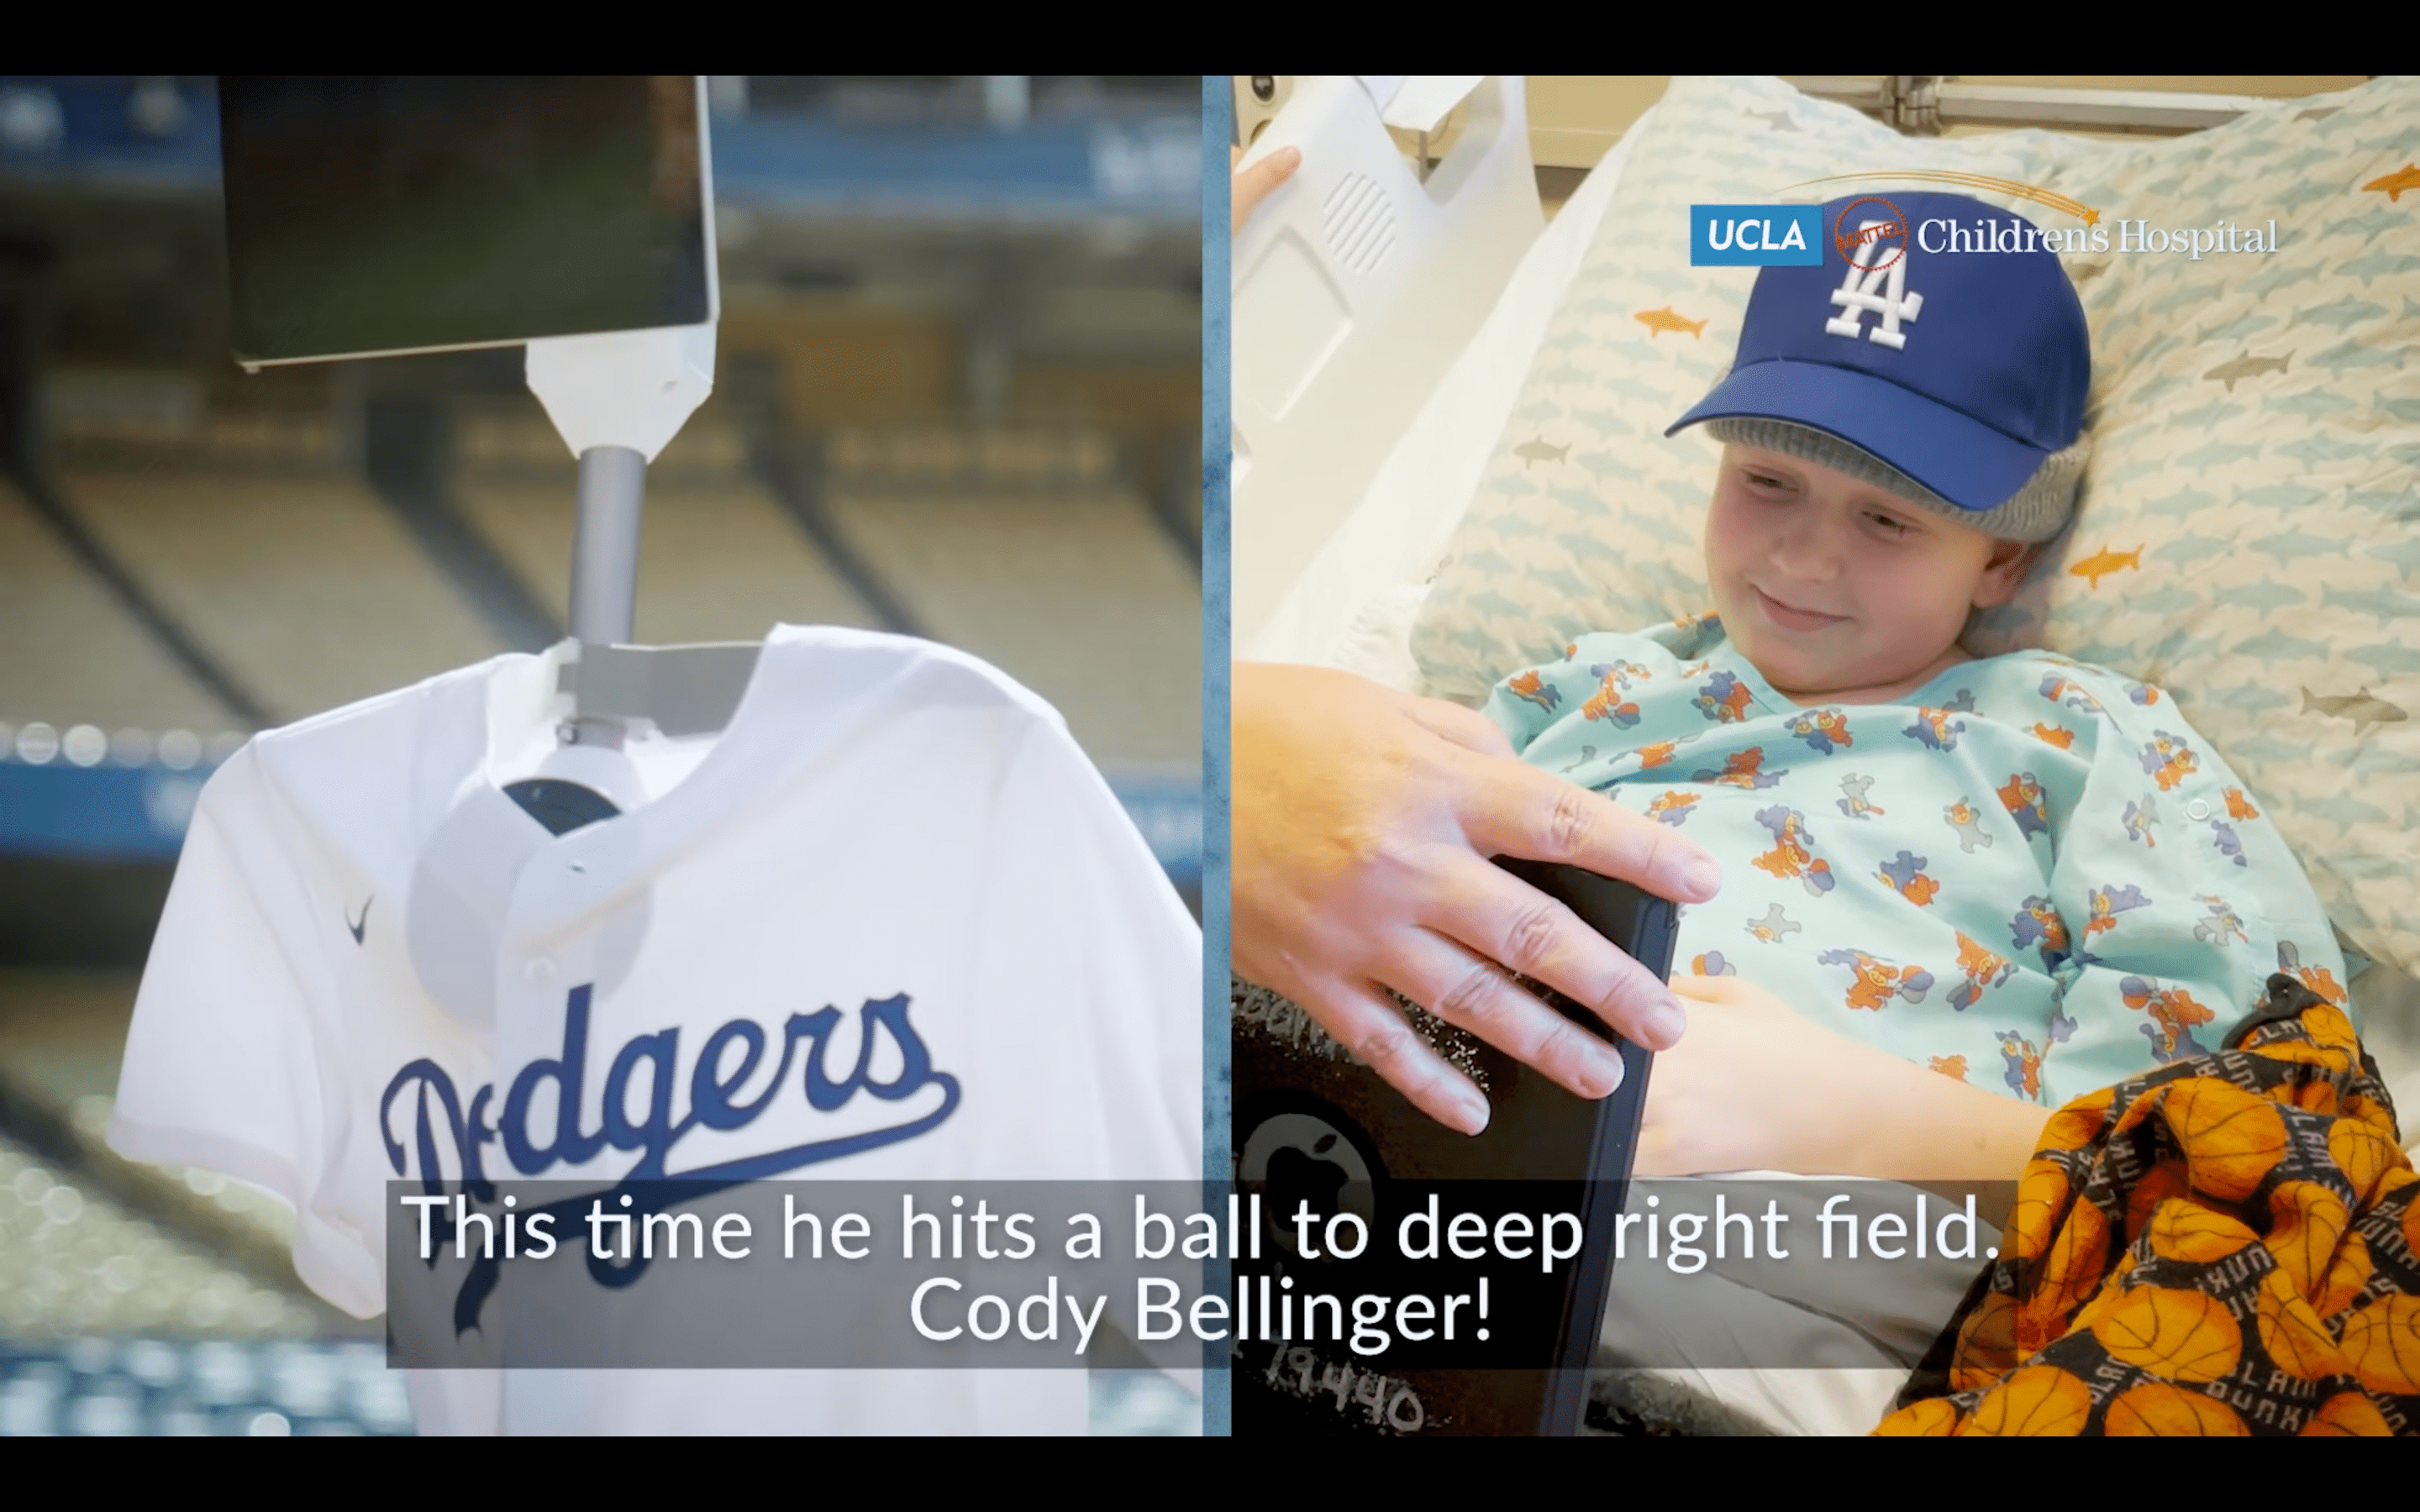 Pediatric patients use Ohmni robot to “run the bases” at Dodger Stadium | UCLA Health